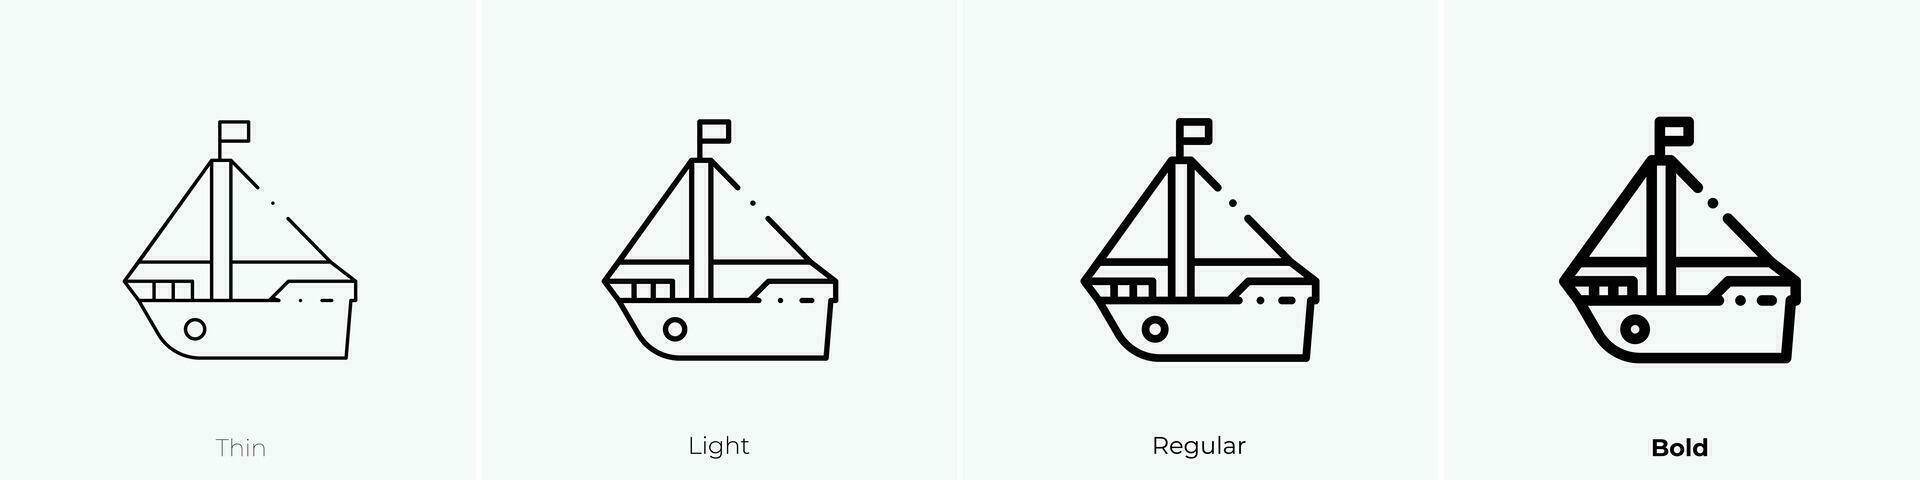 sailing icon. Thin, Light, Regular And Bold style design isolated on white background vector